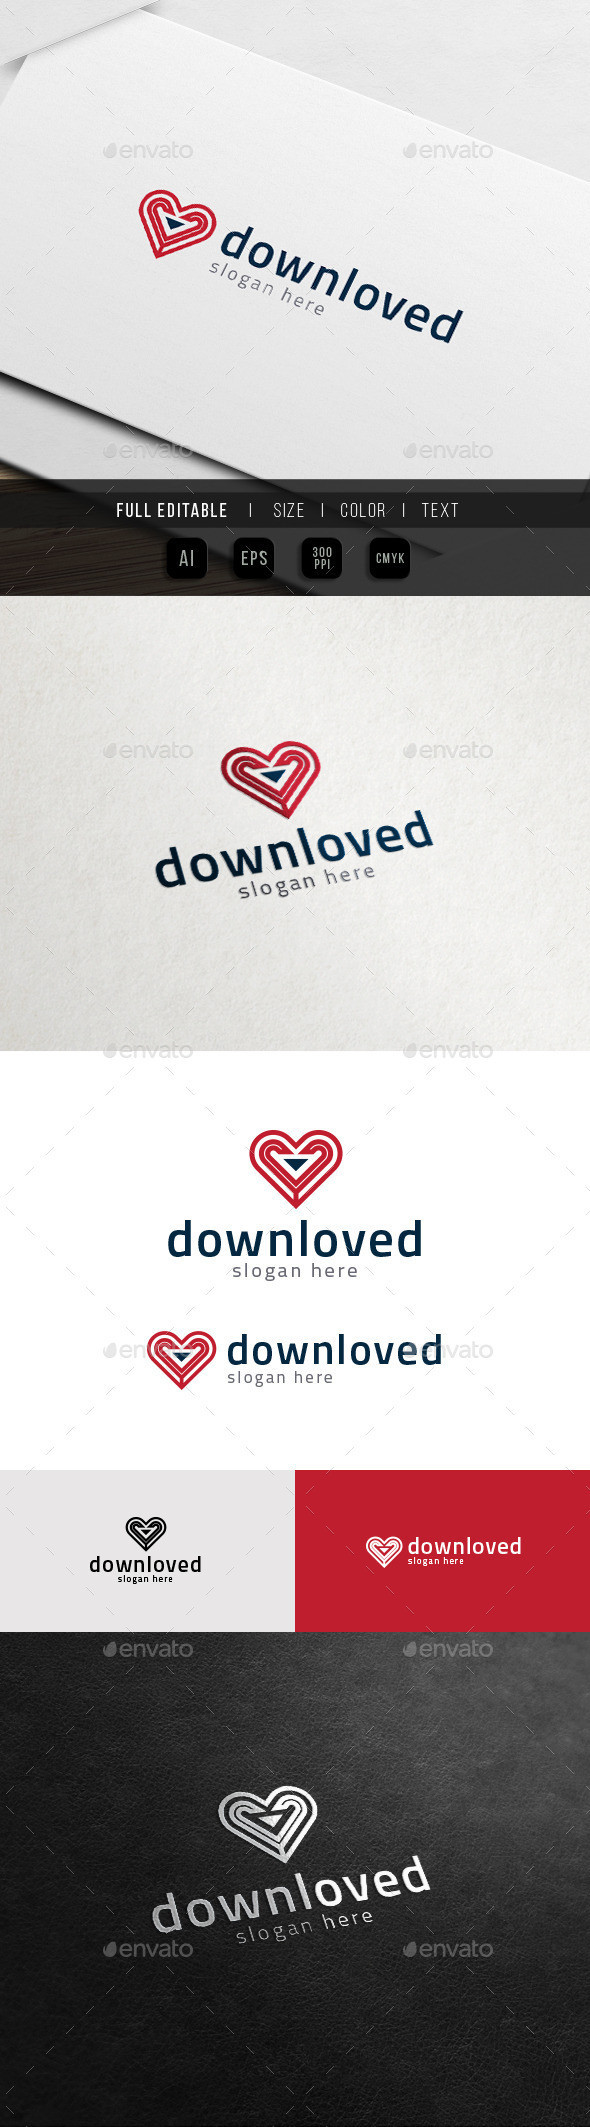 Downloved   preview